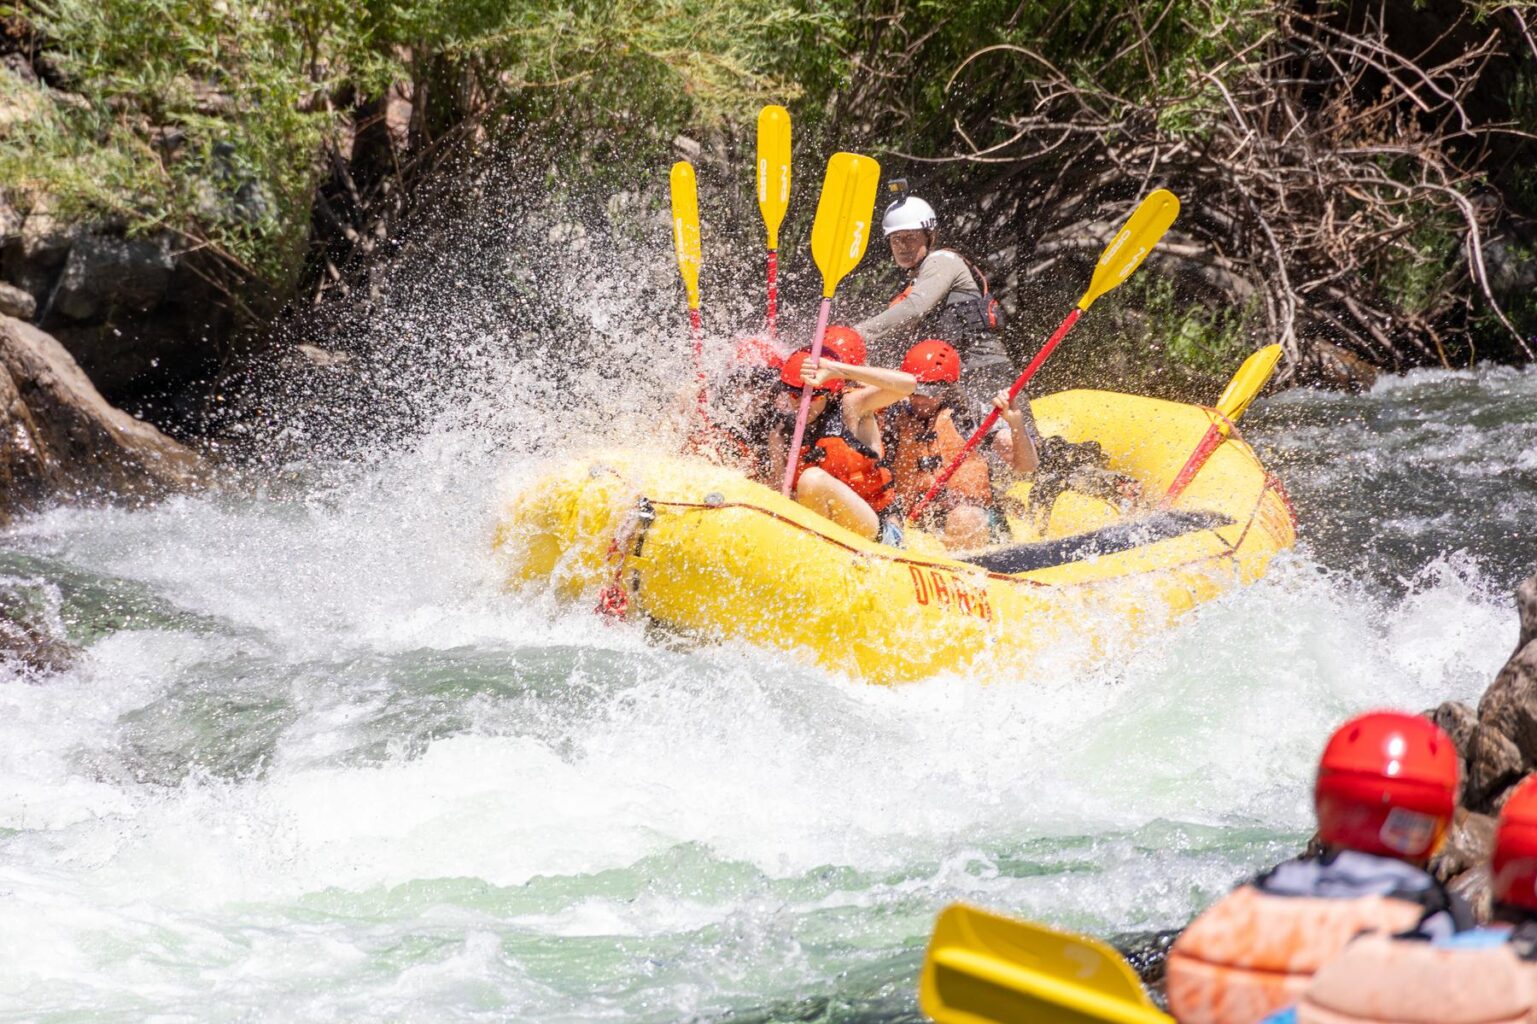 Splashing through a rapid on an OARS guided rafting trip on California's Middle Fork American River